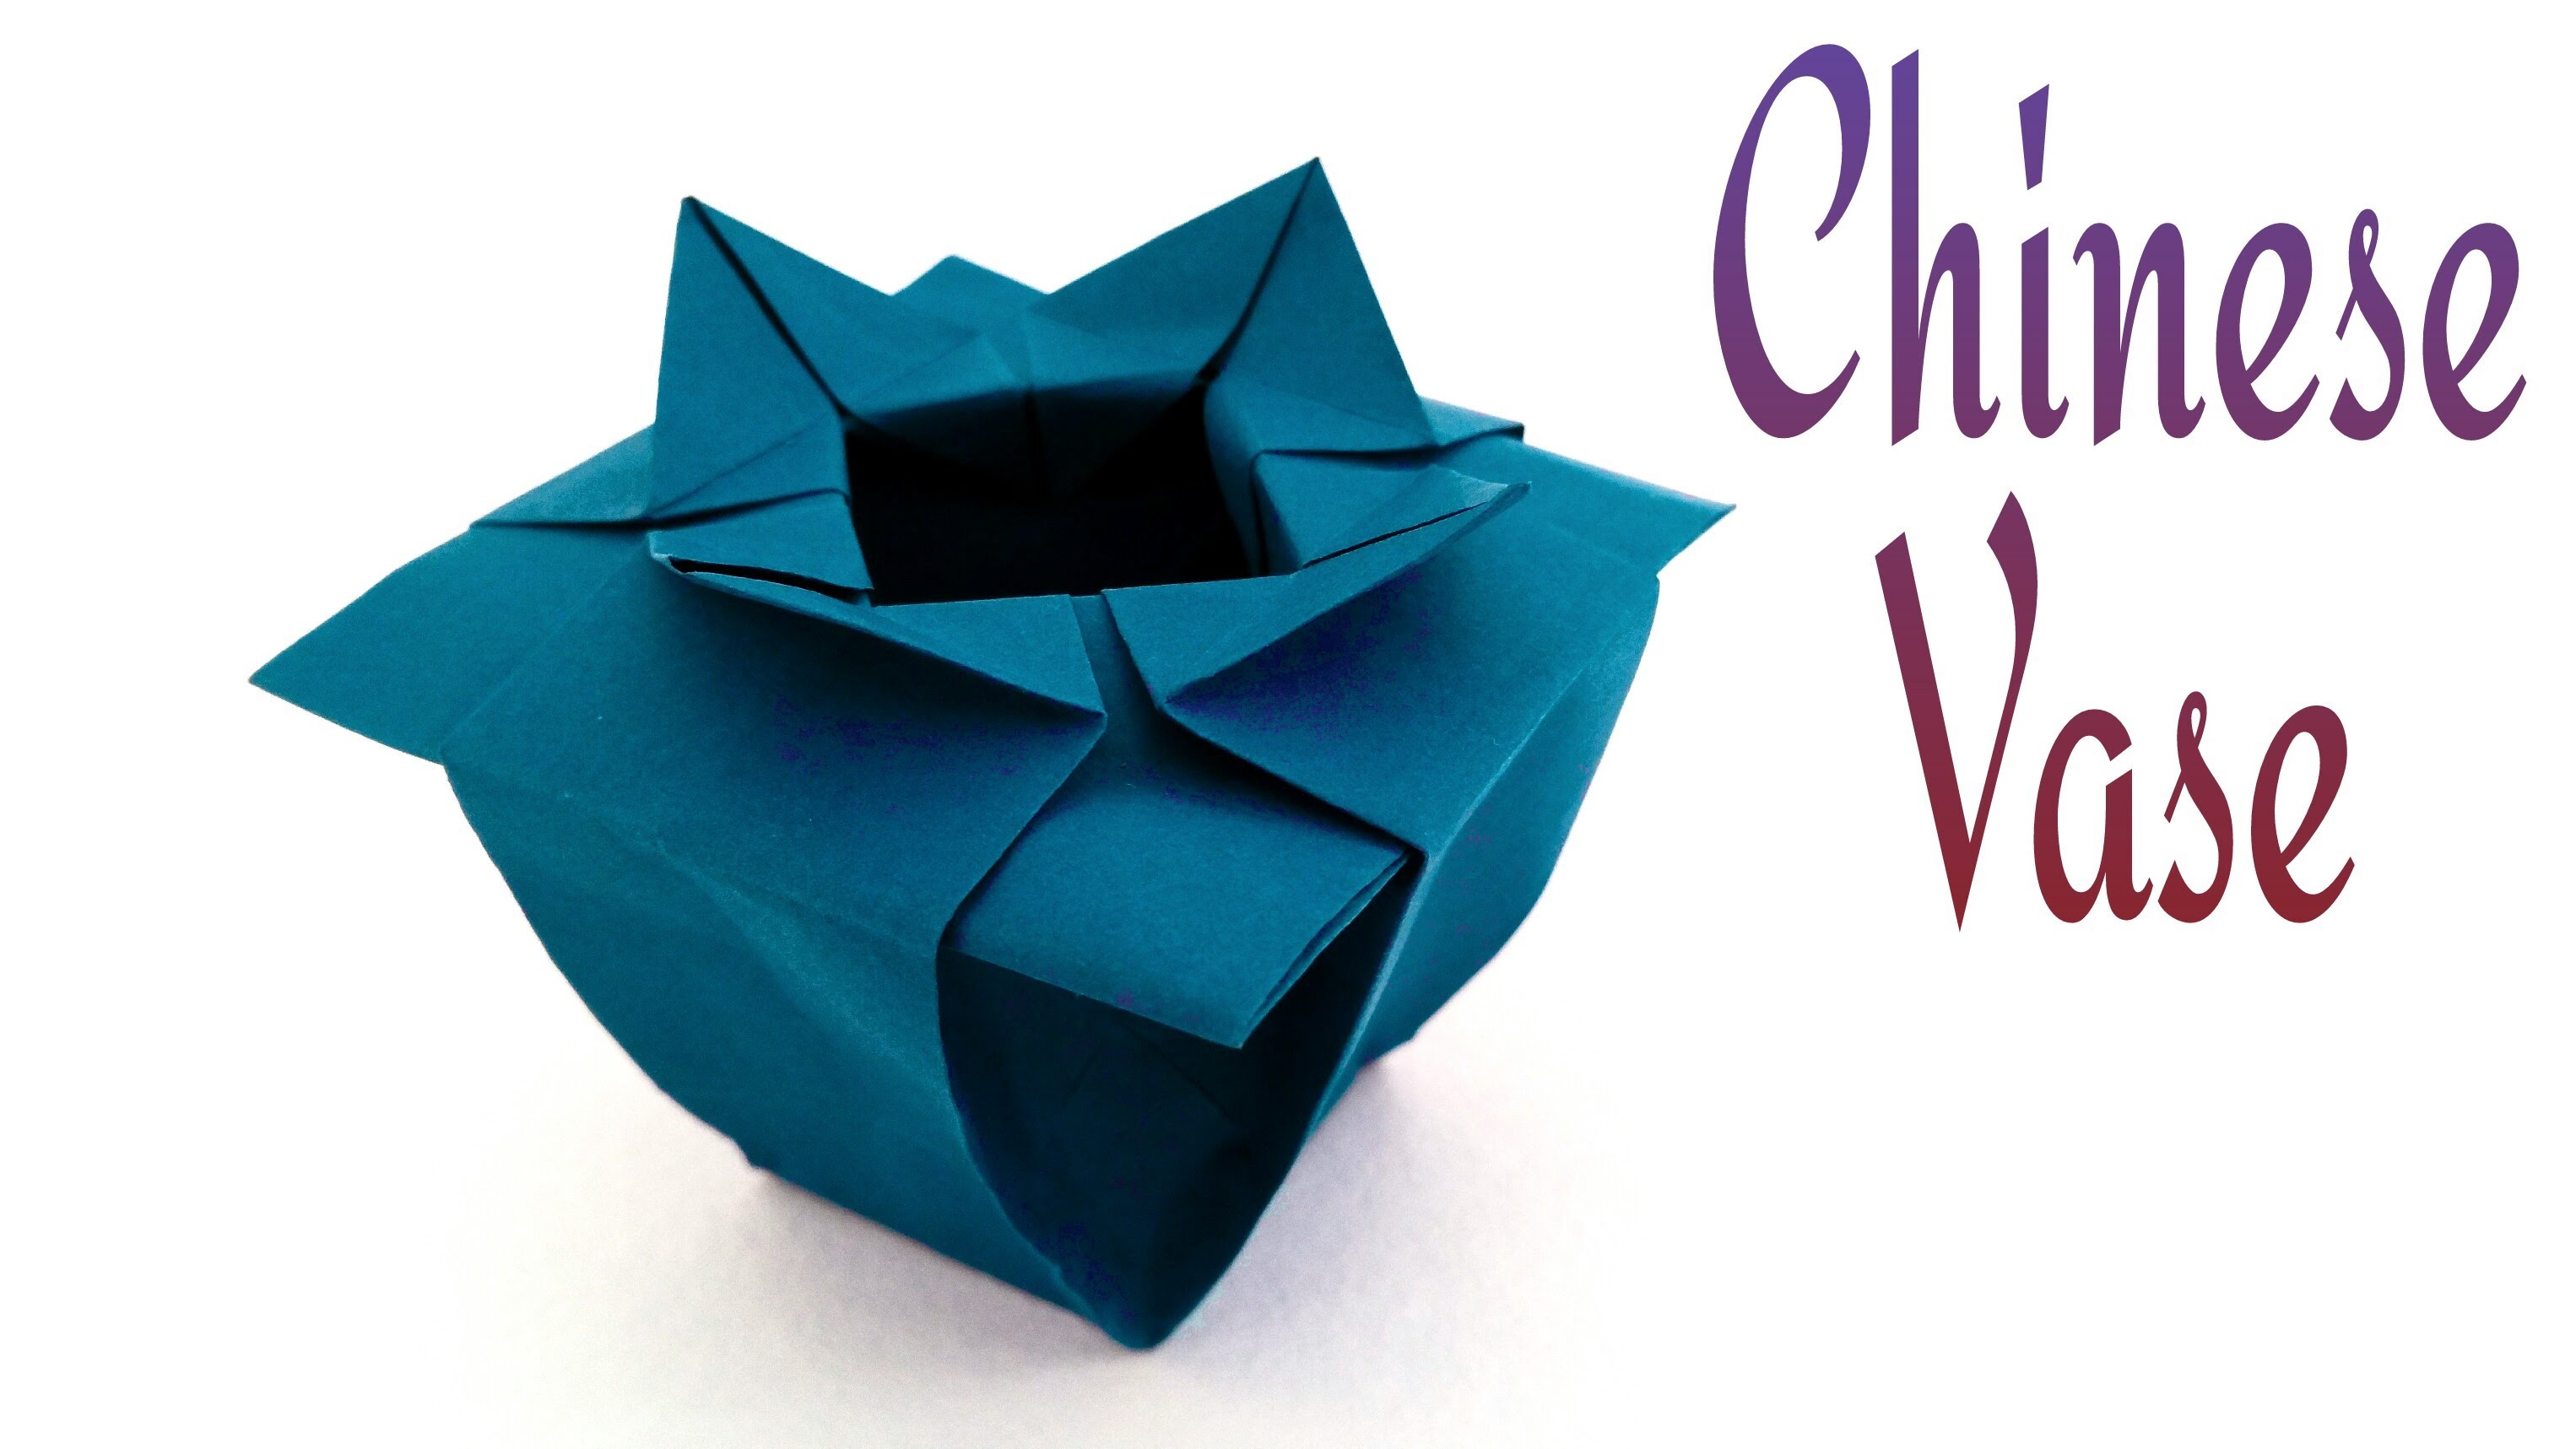 How to make a paper " Chinese Vase" - Origami tutorial